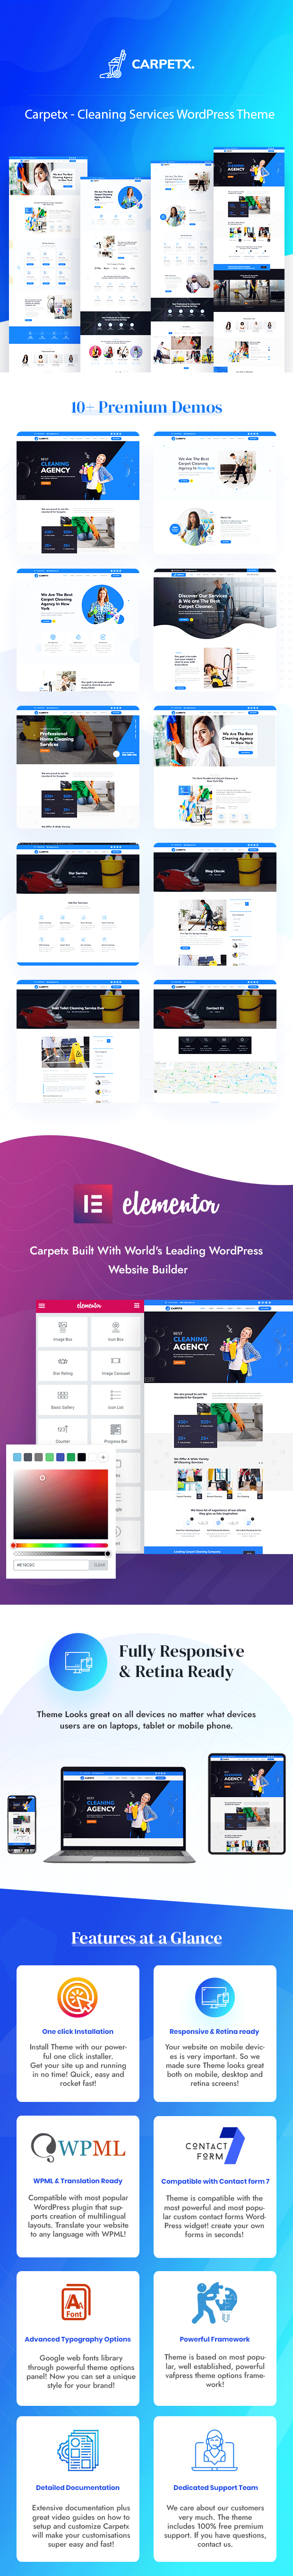 Carpetx - Cleaning Services WordPress Theme - 2